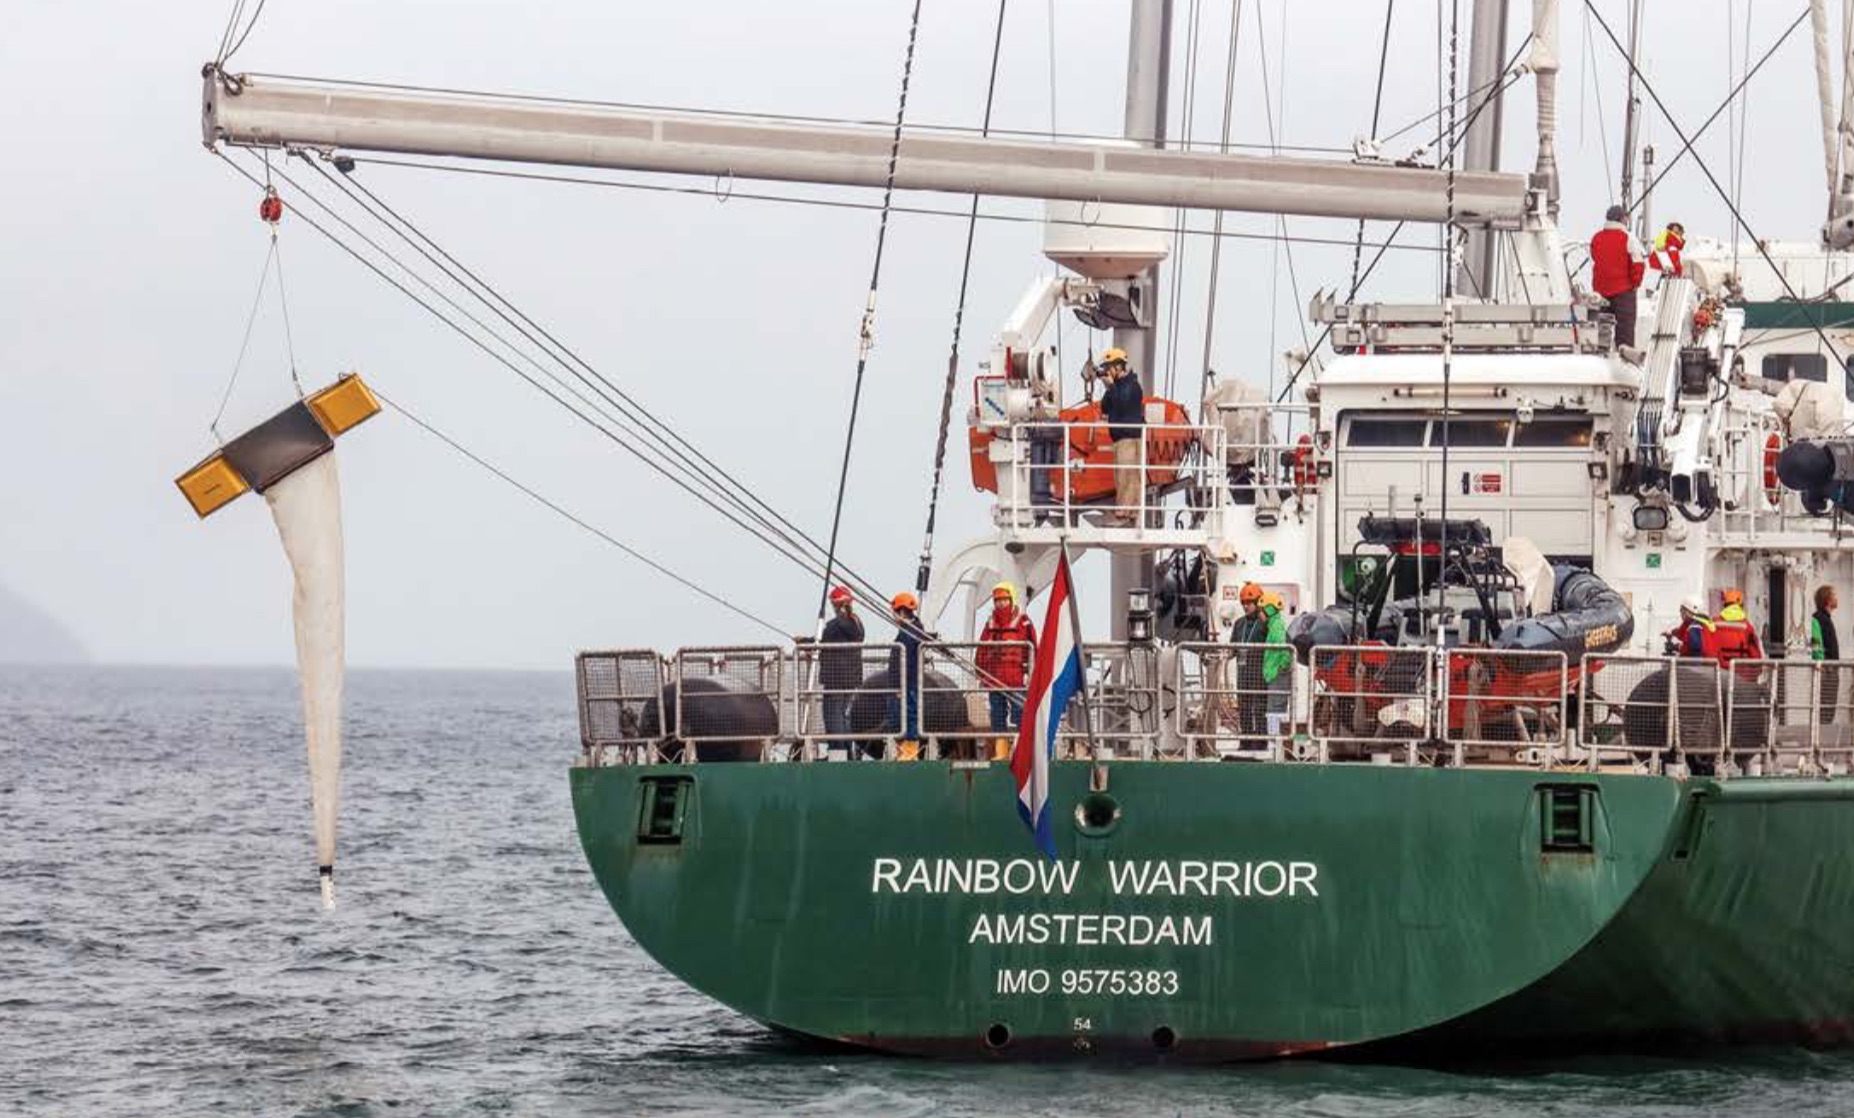 Greenpeace’s ship, the Rainbow Warrior, takes samples to determine the plastic content of seawater. Photo via Vincent Chan/Greenpeace.